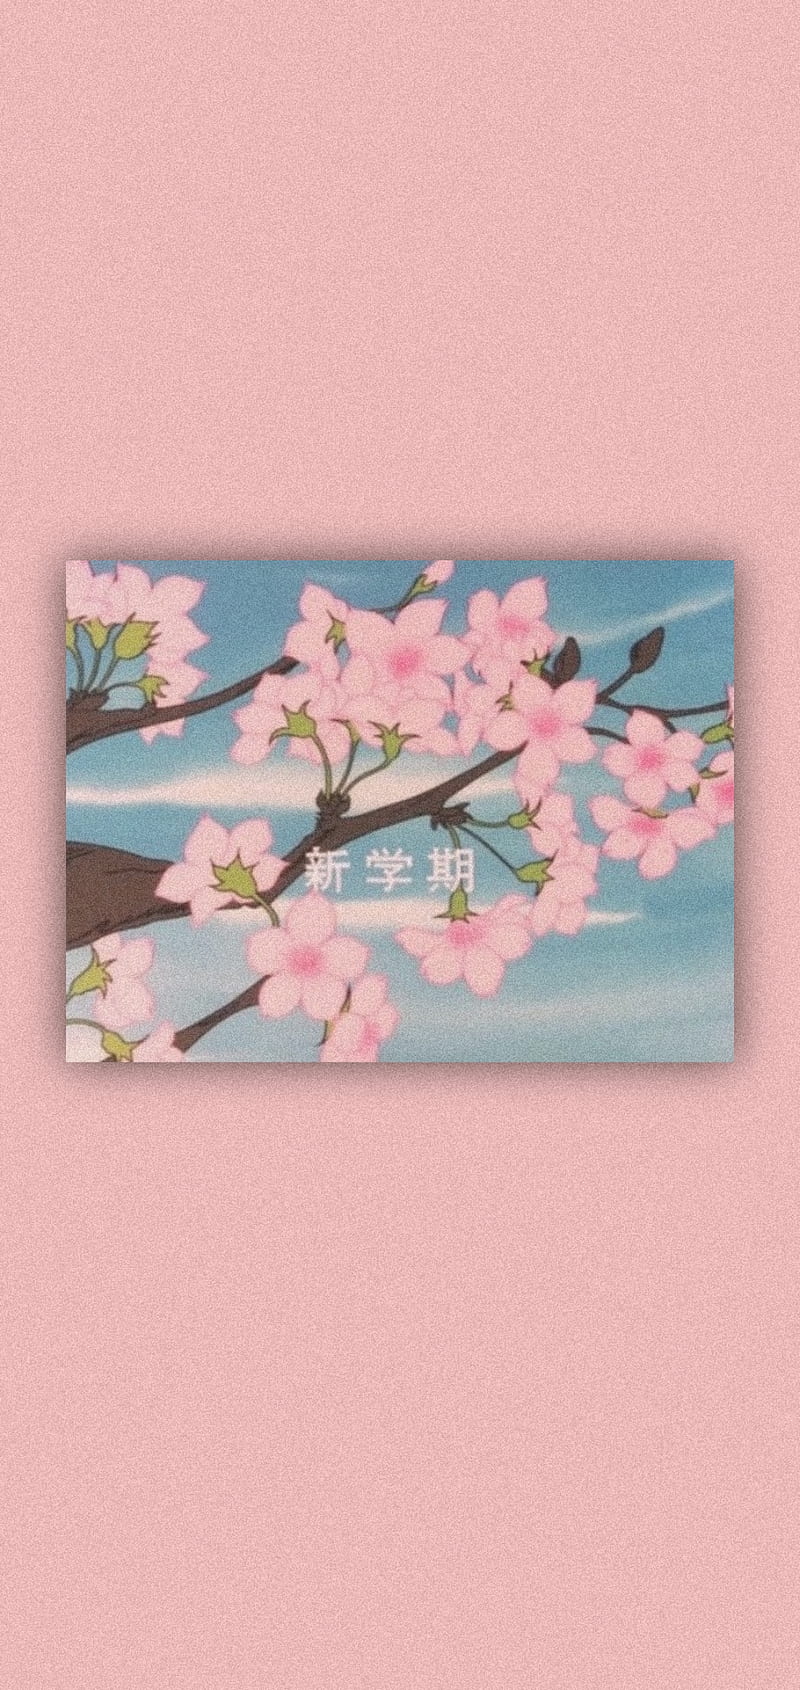 A painting of cherry blossoms on the wall - Pink anime